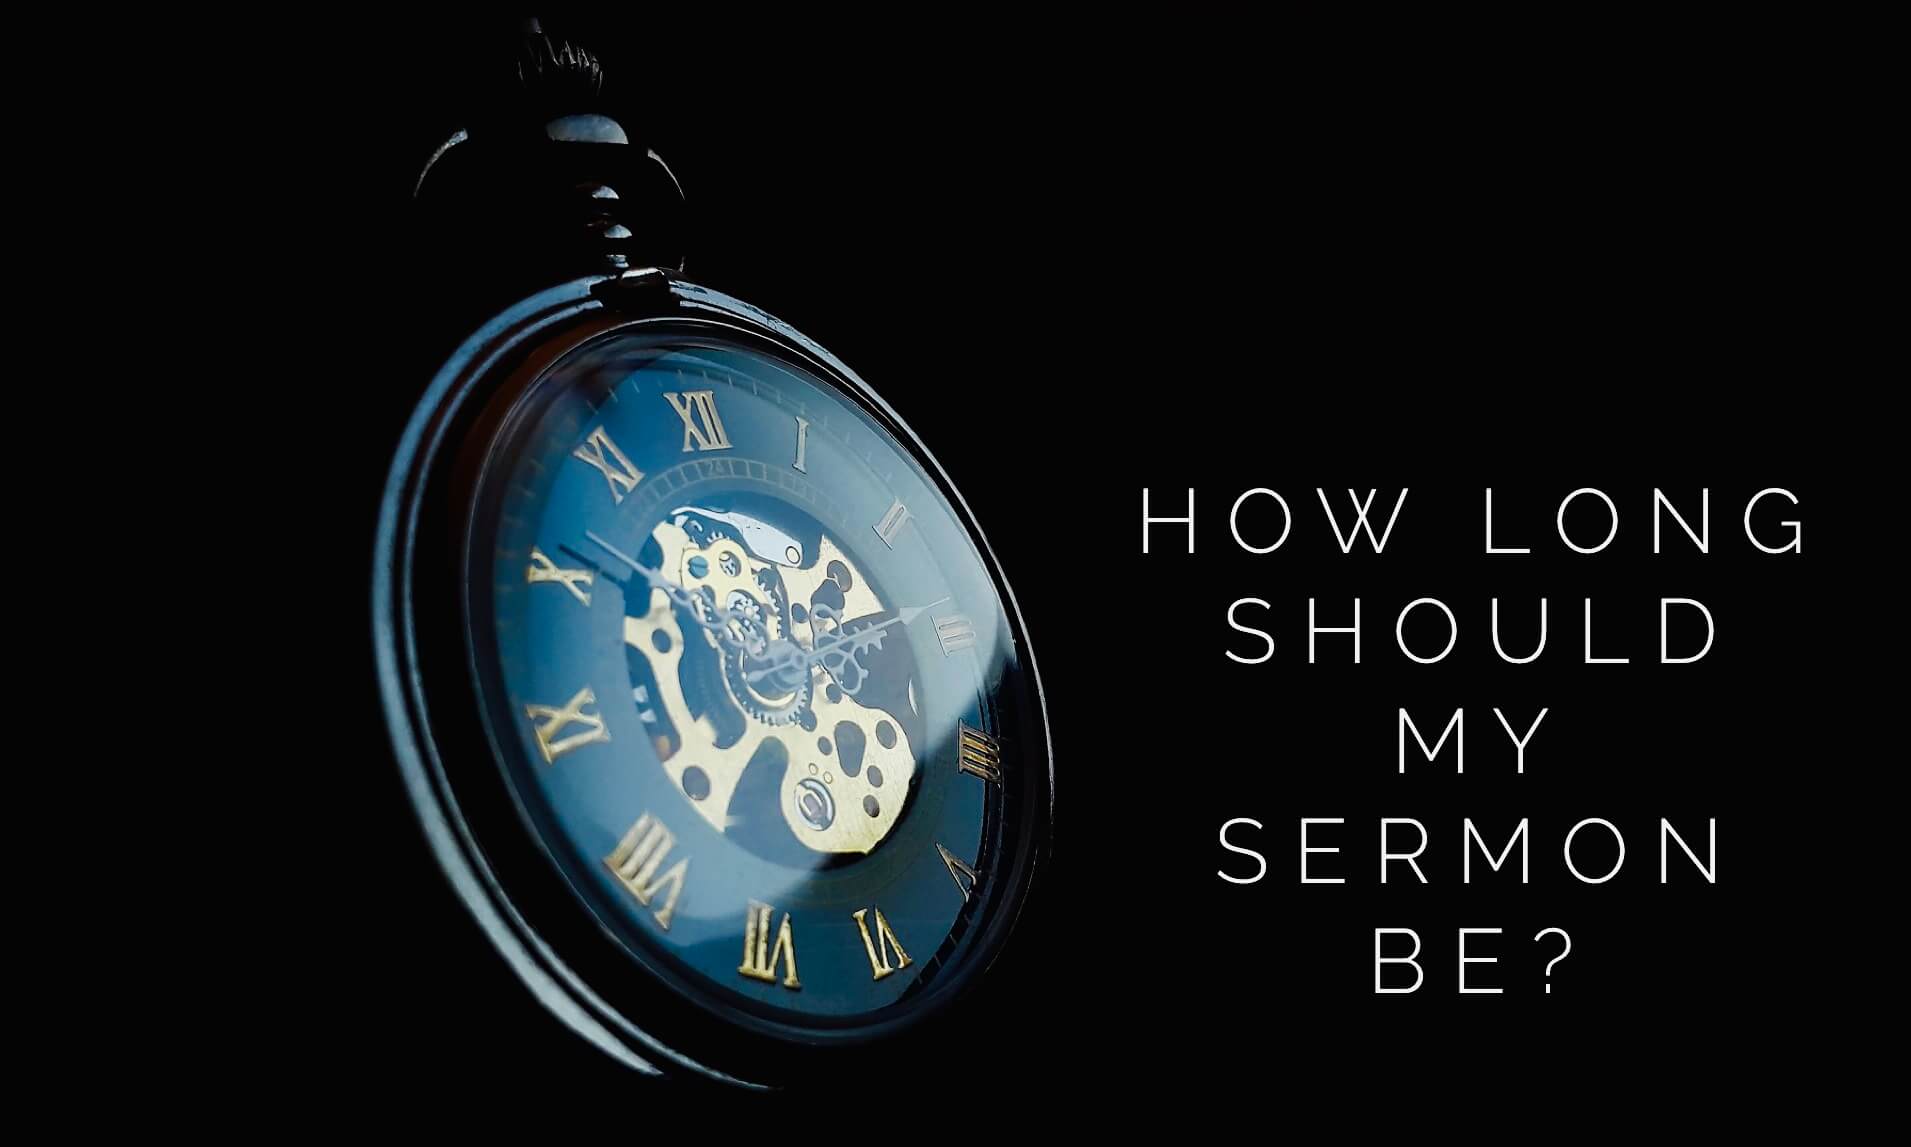 How Long Should My Sermon Be?